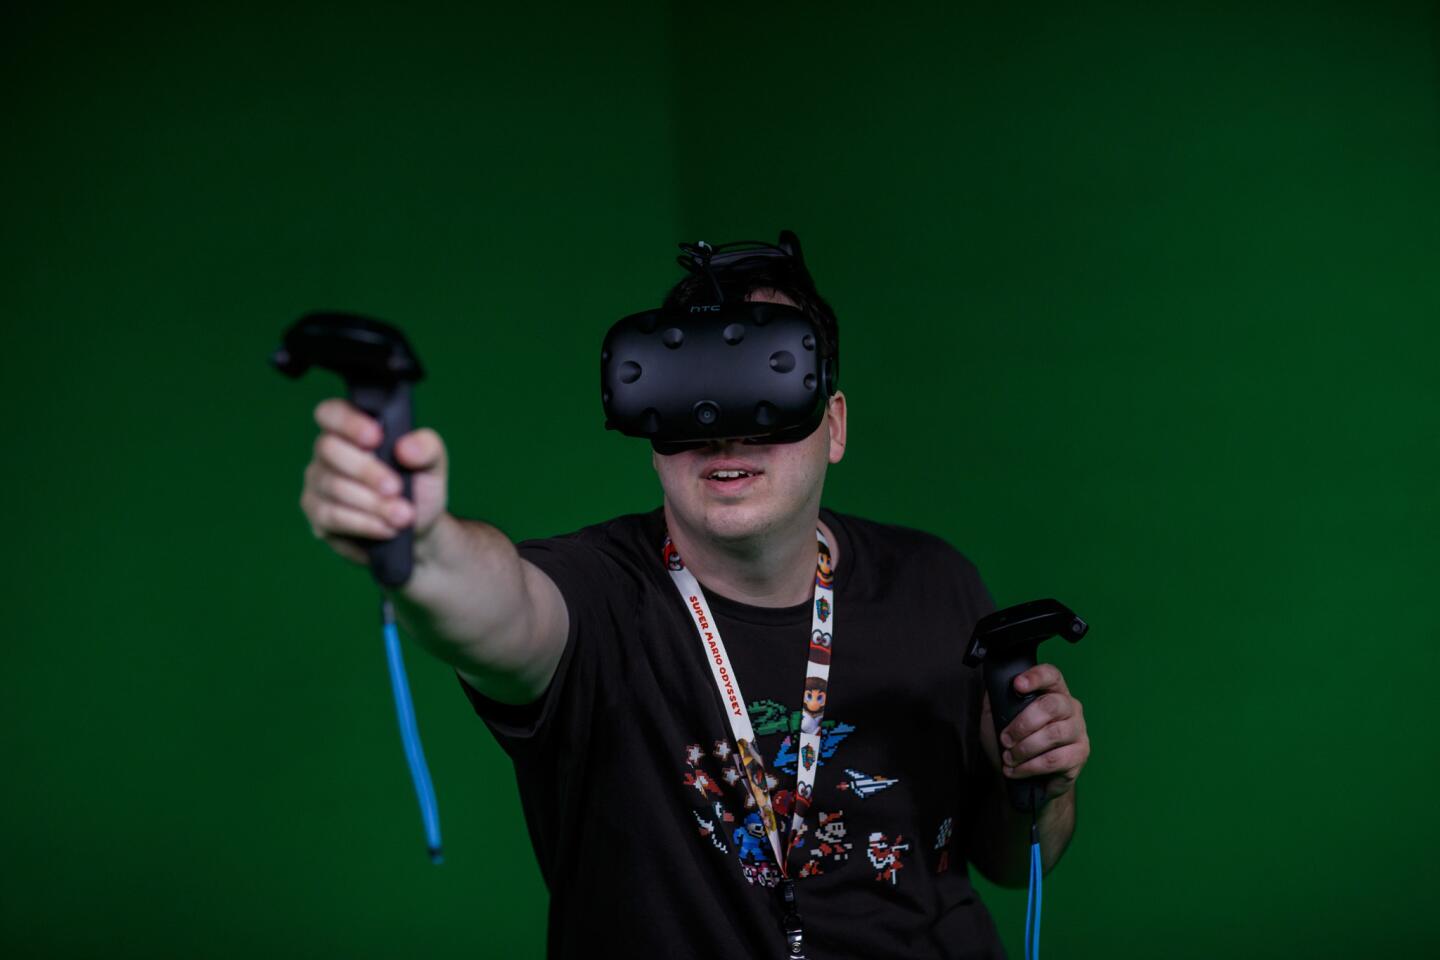 Christopher Galloway tries out a wireless virtual reality unit for a first person shooter game at E3 in Los Angeles.